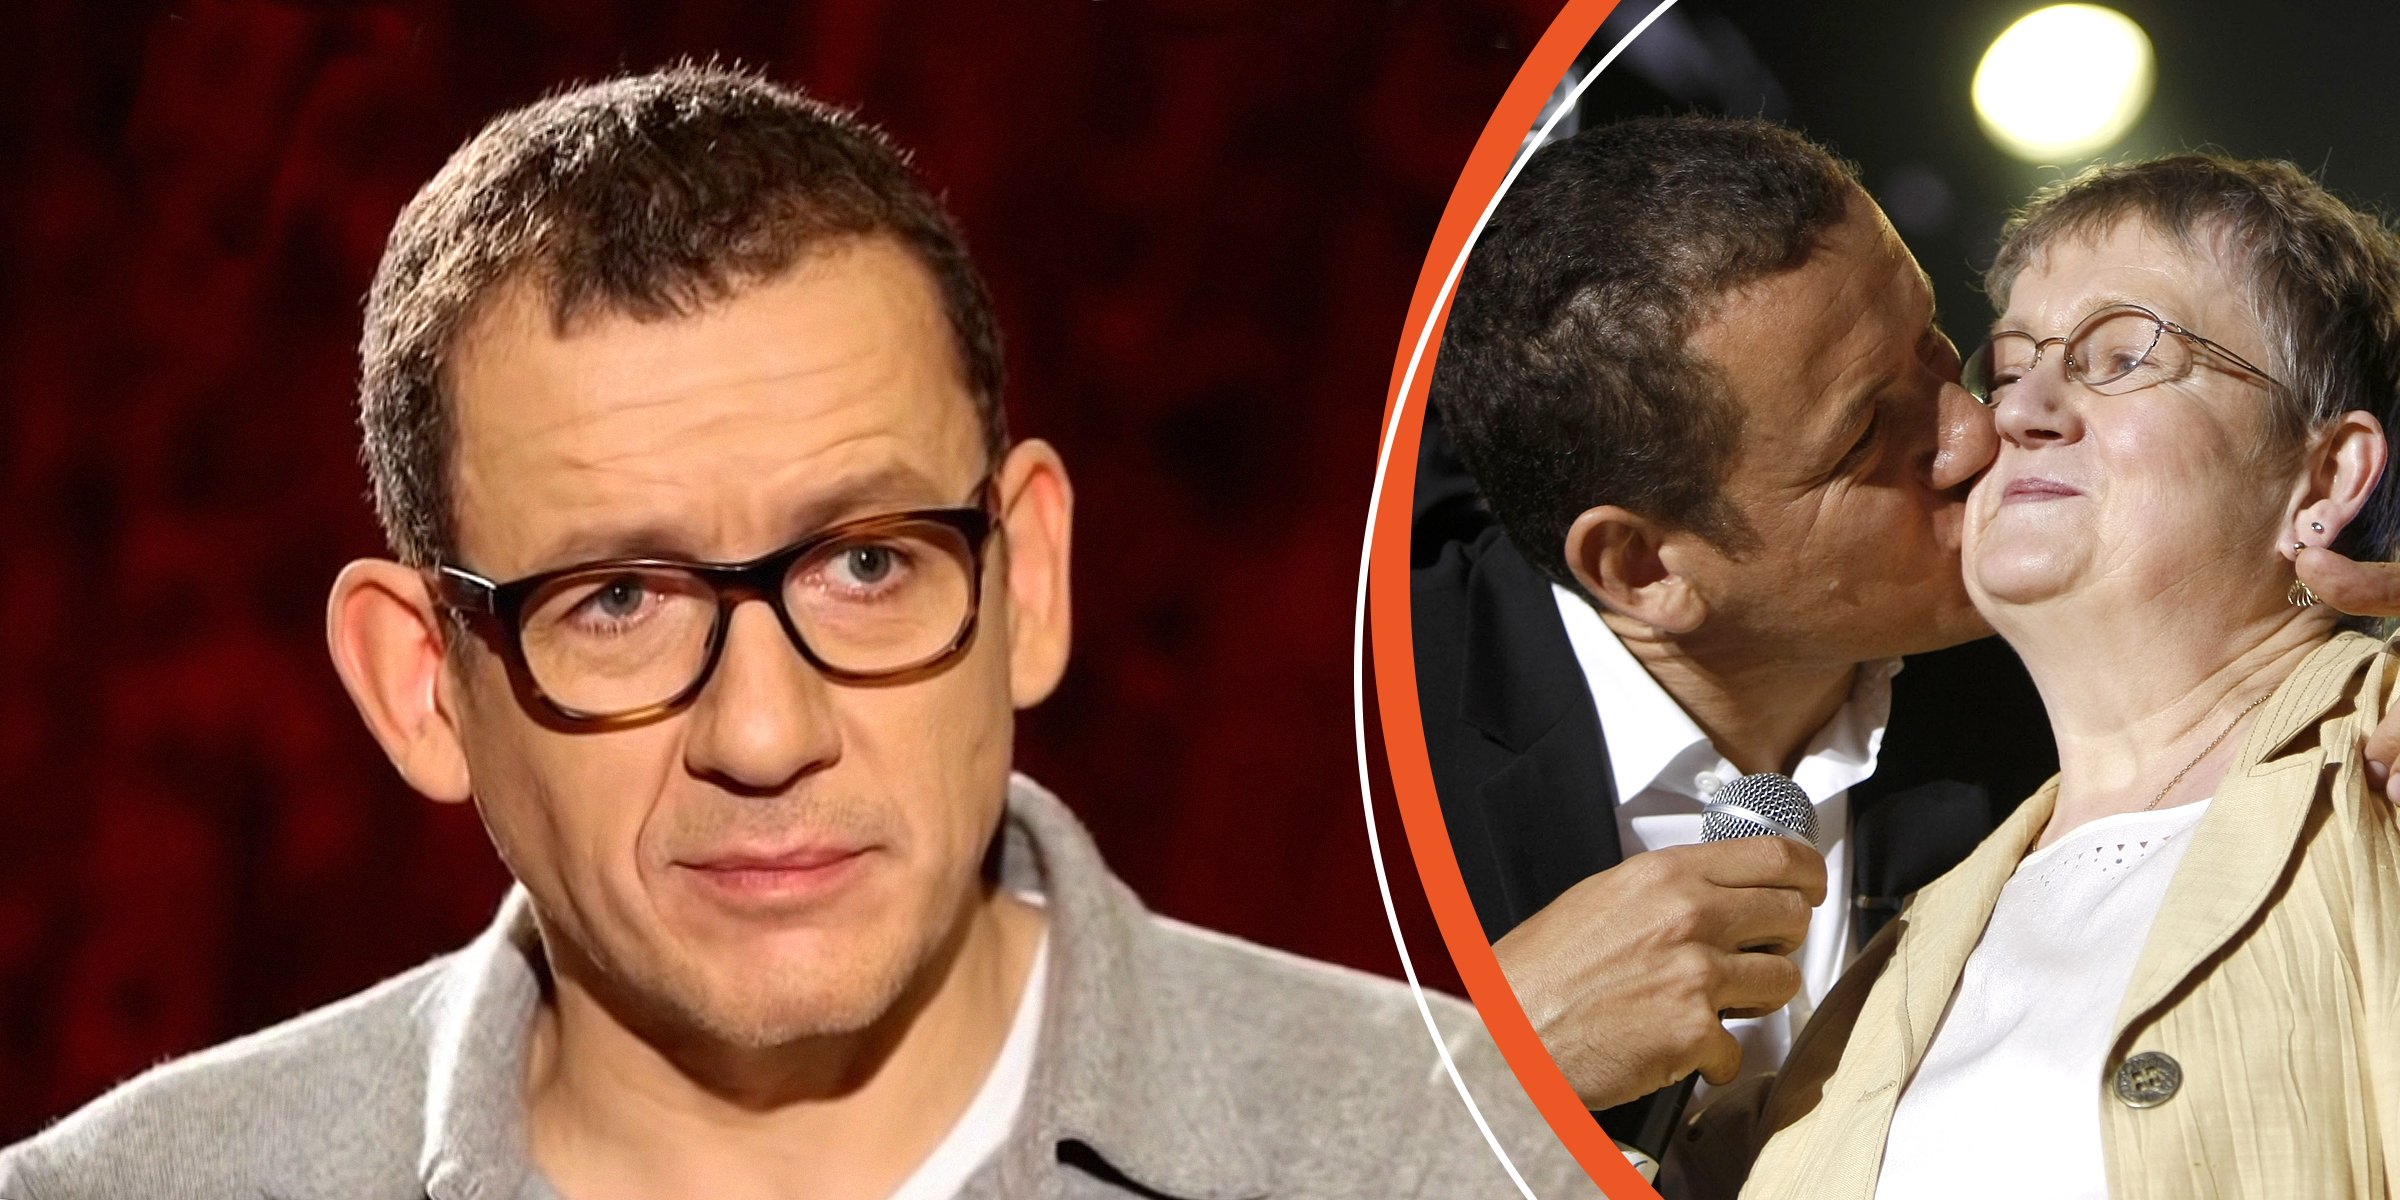 Dany Boon et sa maman | Getty Images youtube.com/Stupéfiant 